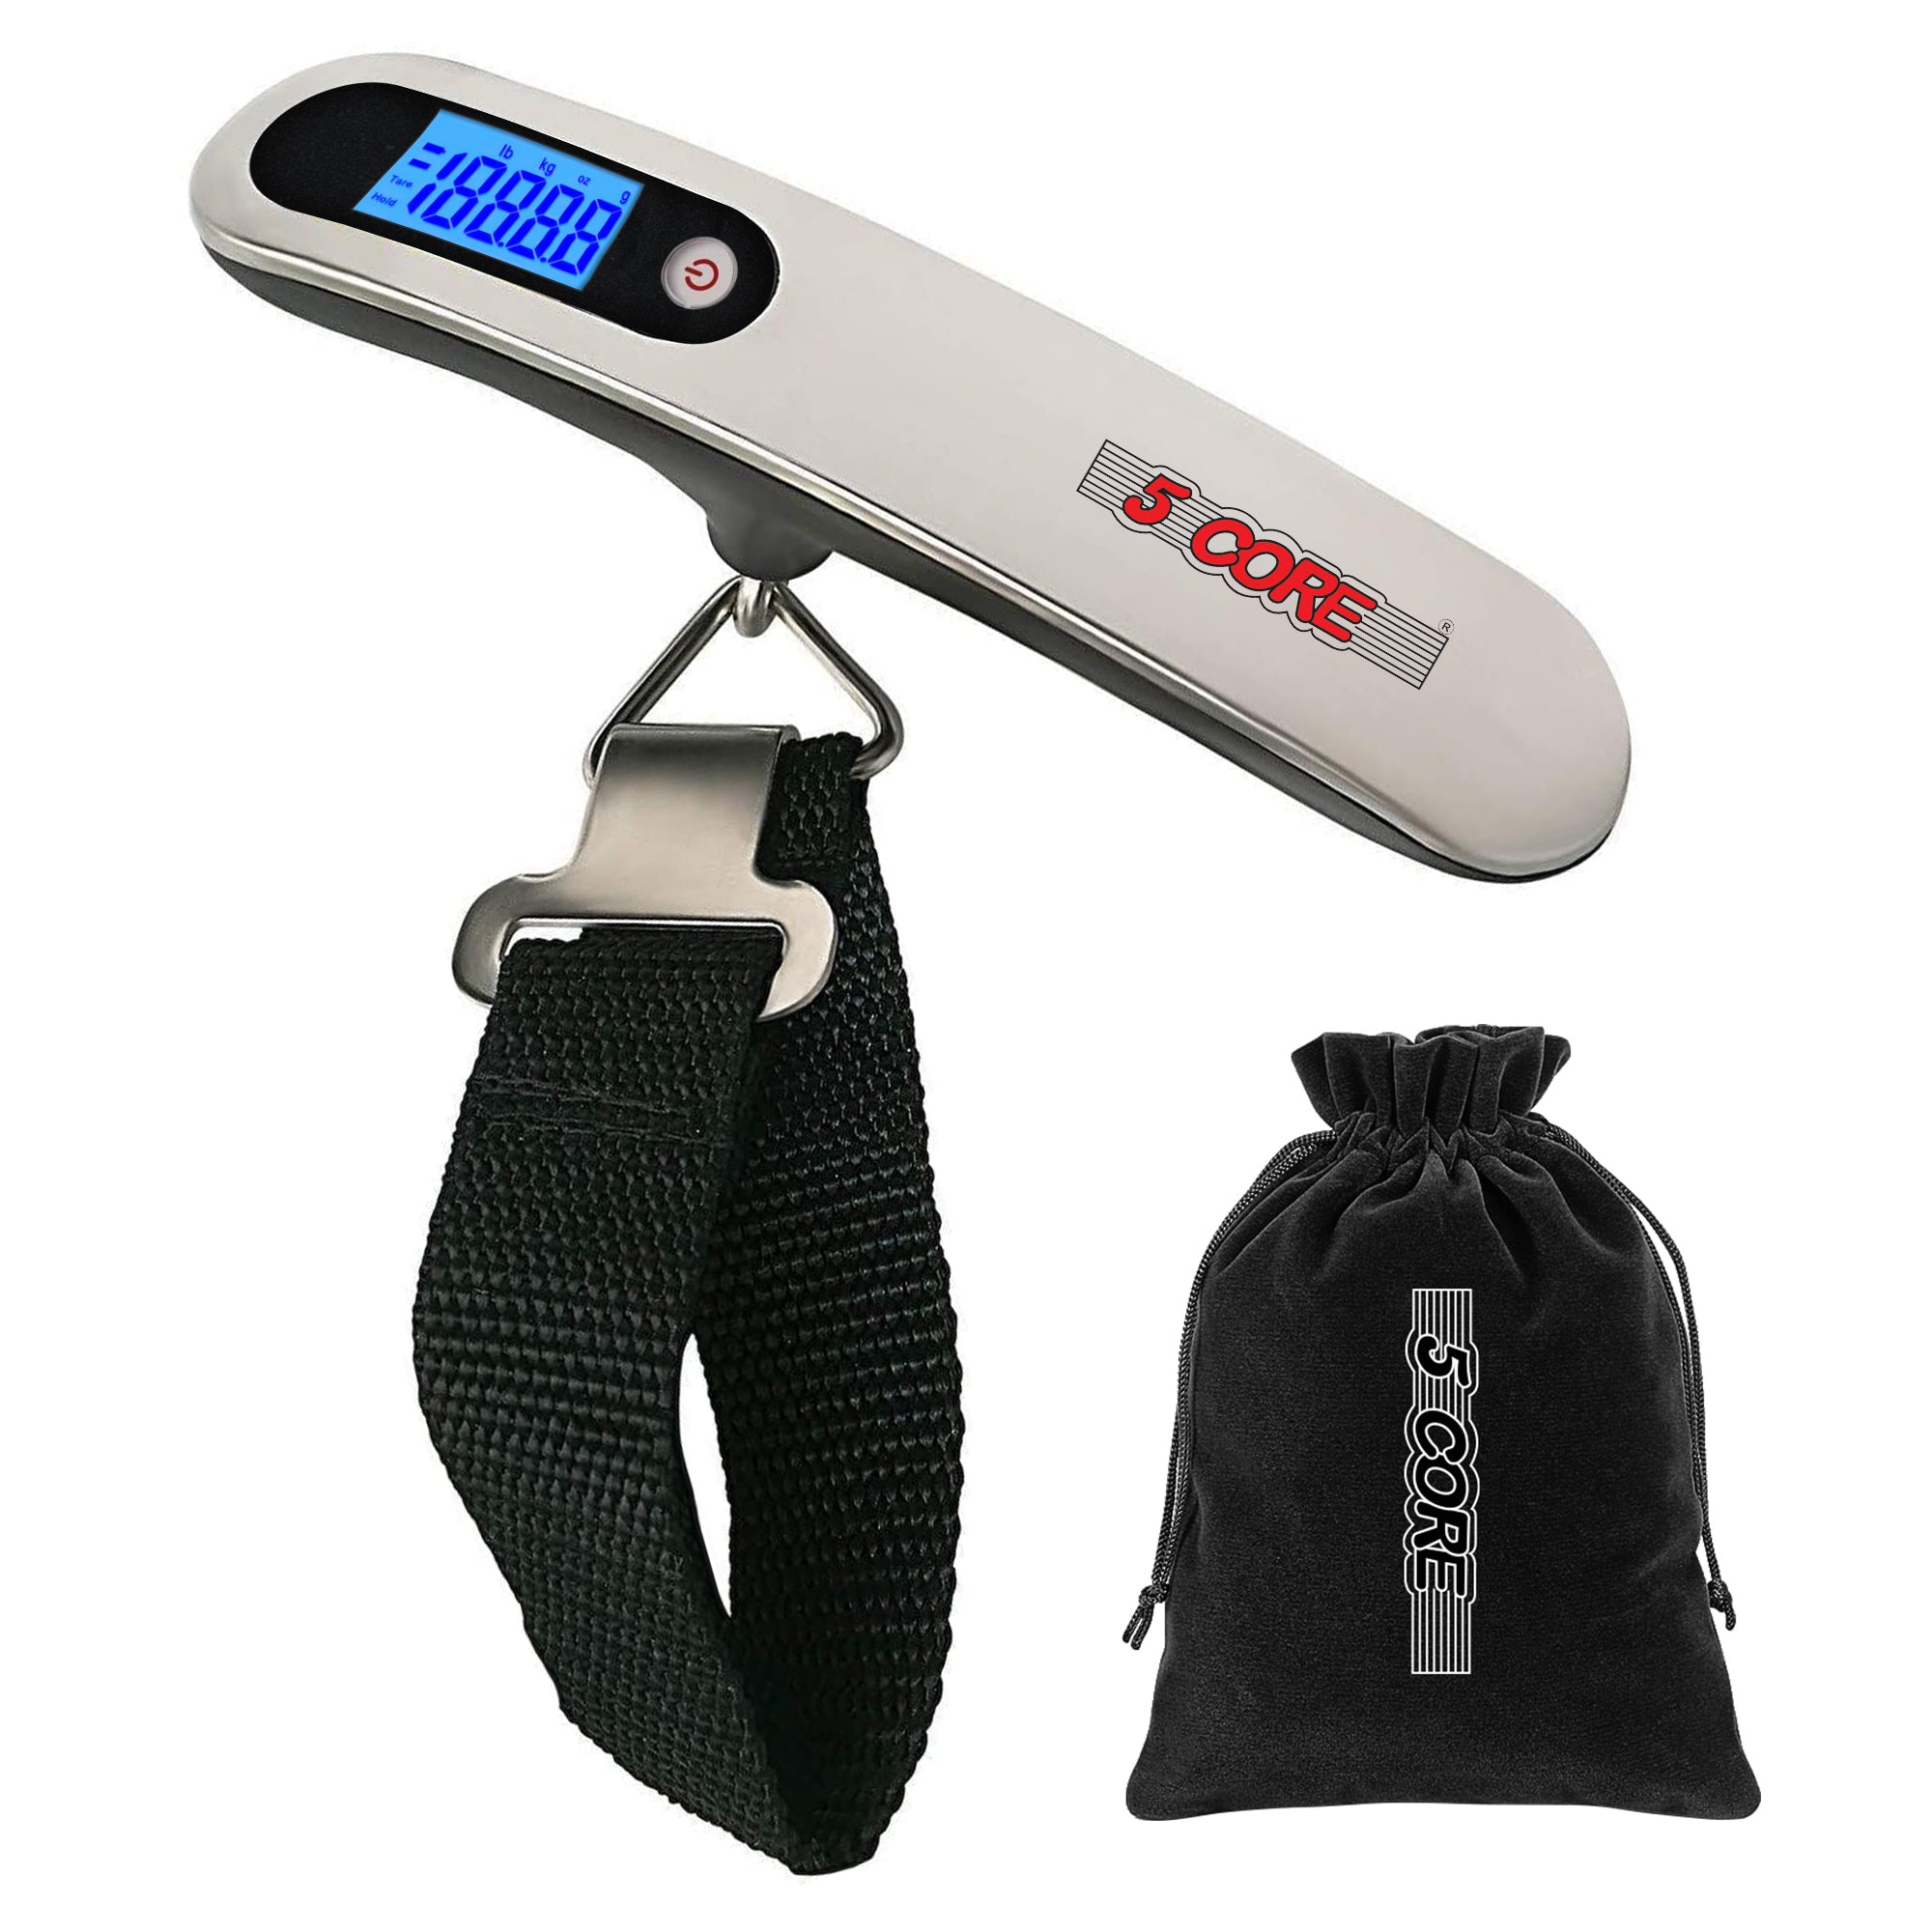 5 Core Luggage Scale 1 Piece 110 Pounds Digital Hanging Weight Scale w Backlight Rubber Paint Handle Battery Included- LS-005